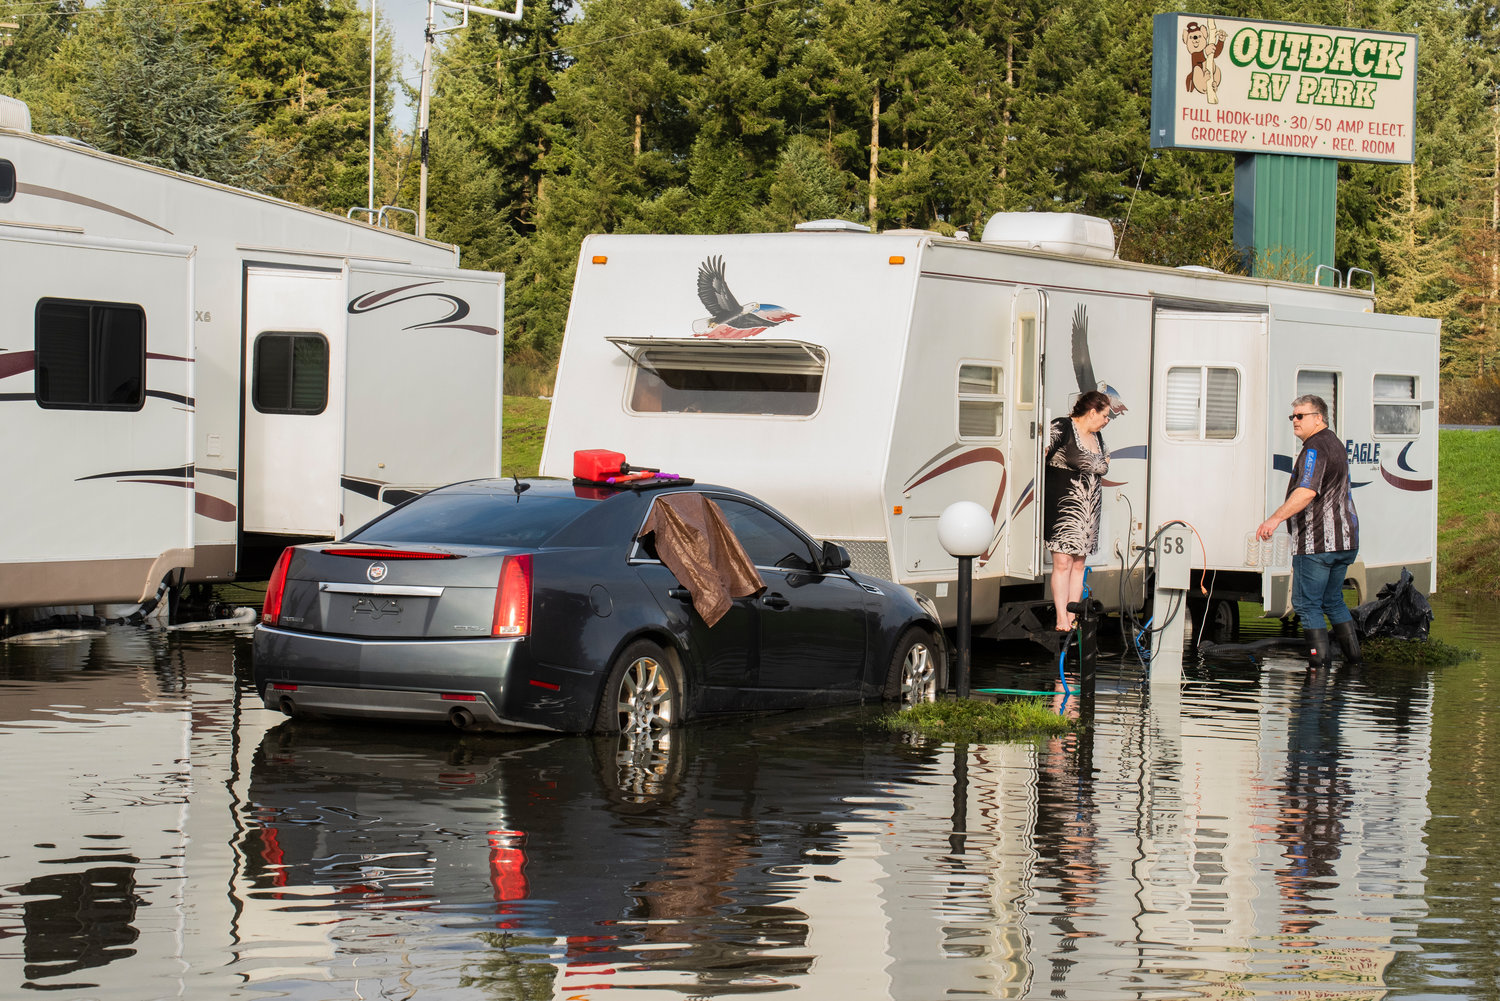 Steve and Mika Weathers step outside their mobile trailer to gather items and access damage to two vehicles that had water in them at the Outback R.V. Park in Rochester on Saturday.